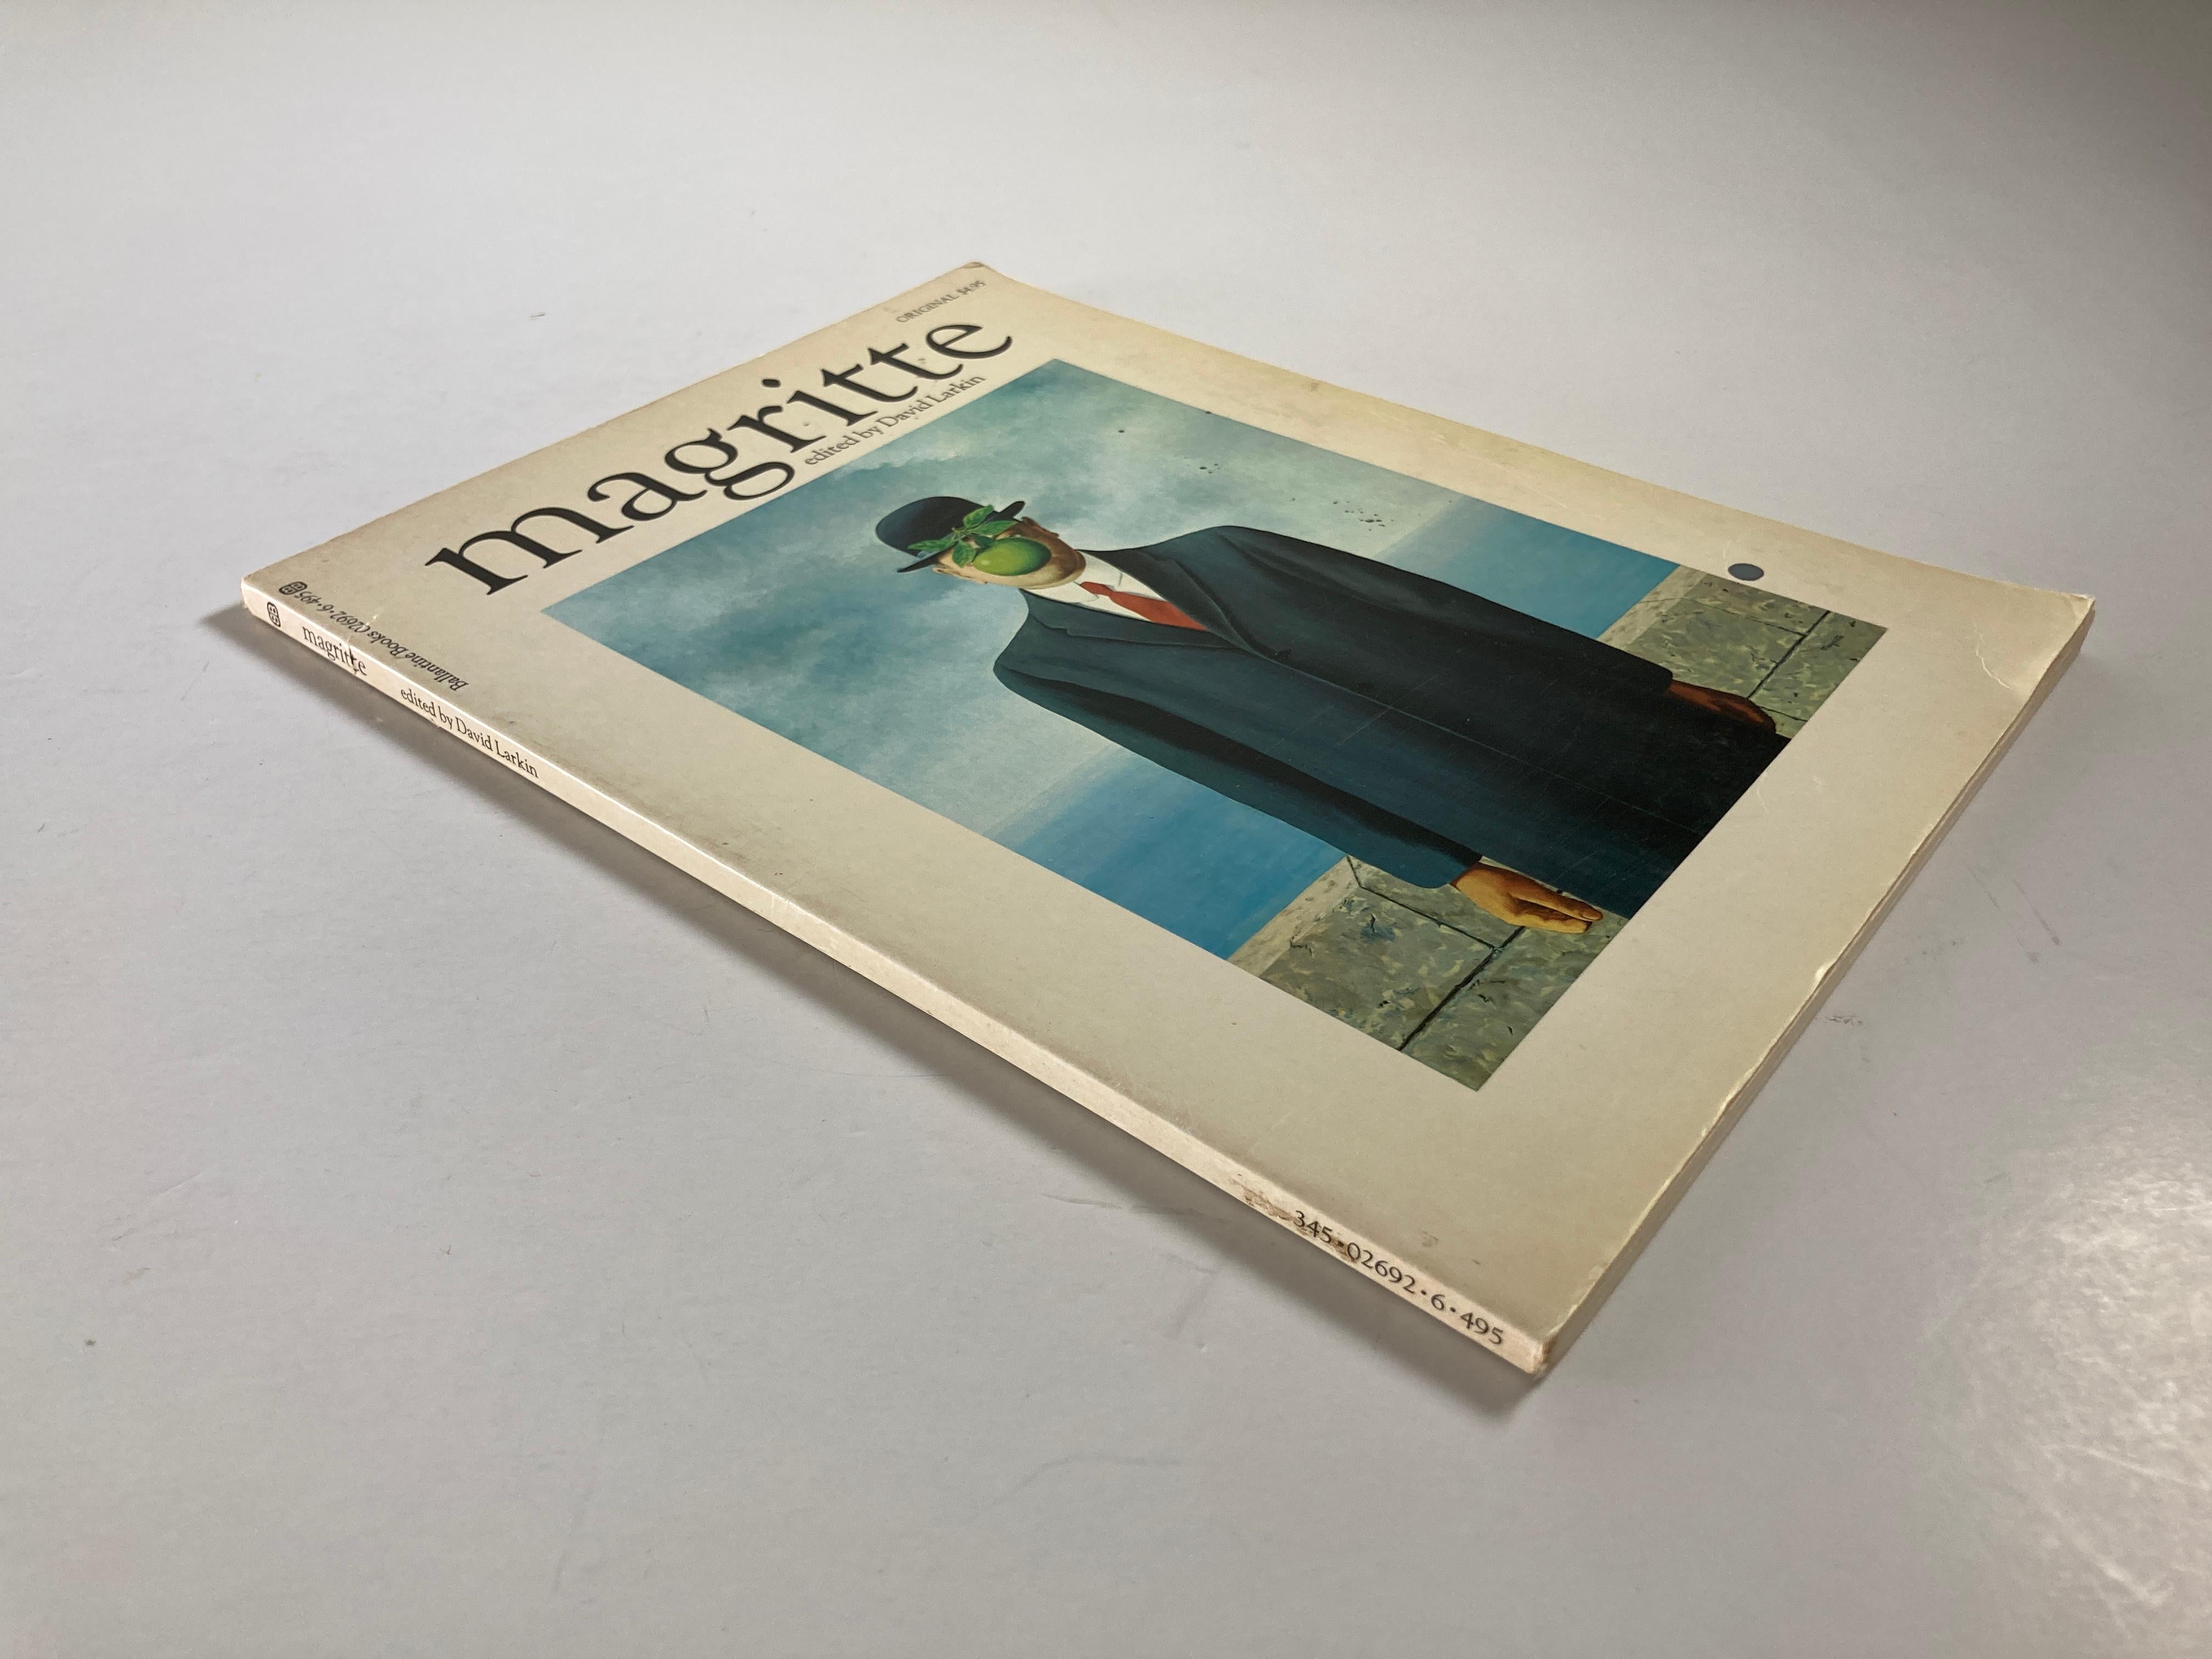 MAGRITTE by Rene Magritte. Printed in Italy.
Magritte. introduction by Eddie Wolfram edited by David, Larkin 
Published by Ballantine, 1973
The enigmatic images of the great Surrealist Rene Magritte (1898-1967) are so powerful that they seem to